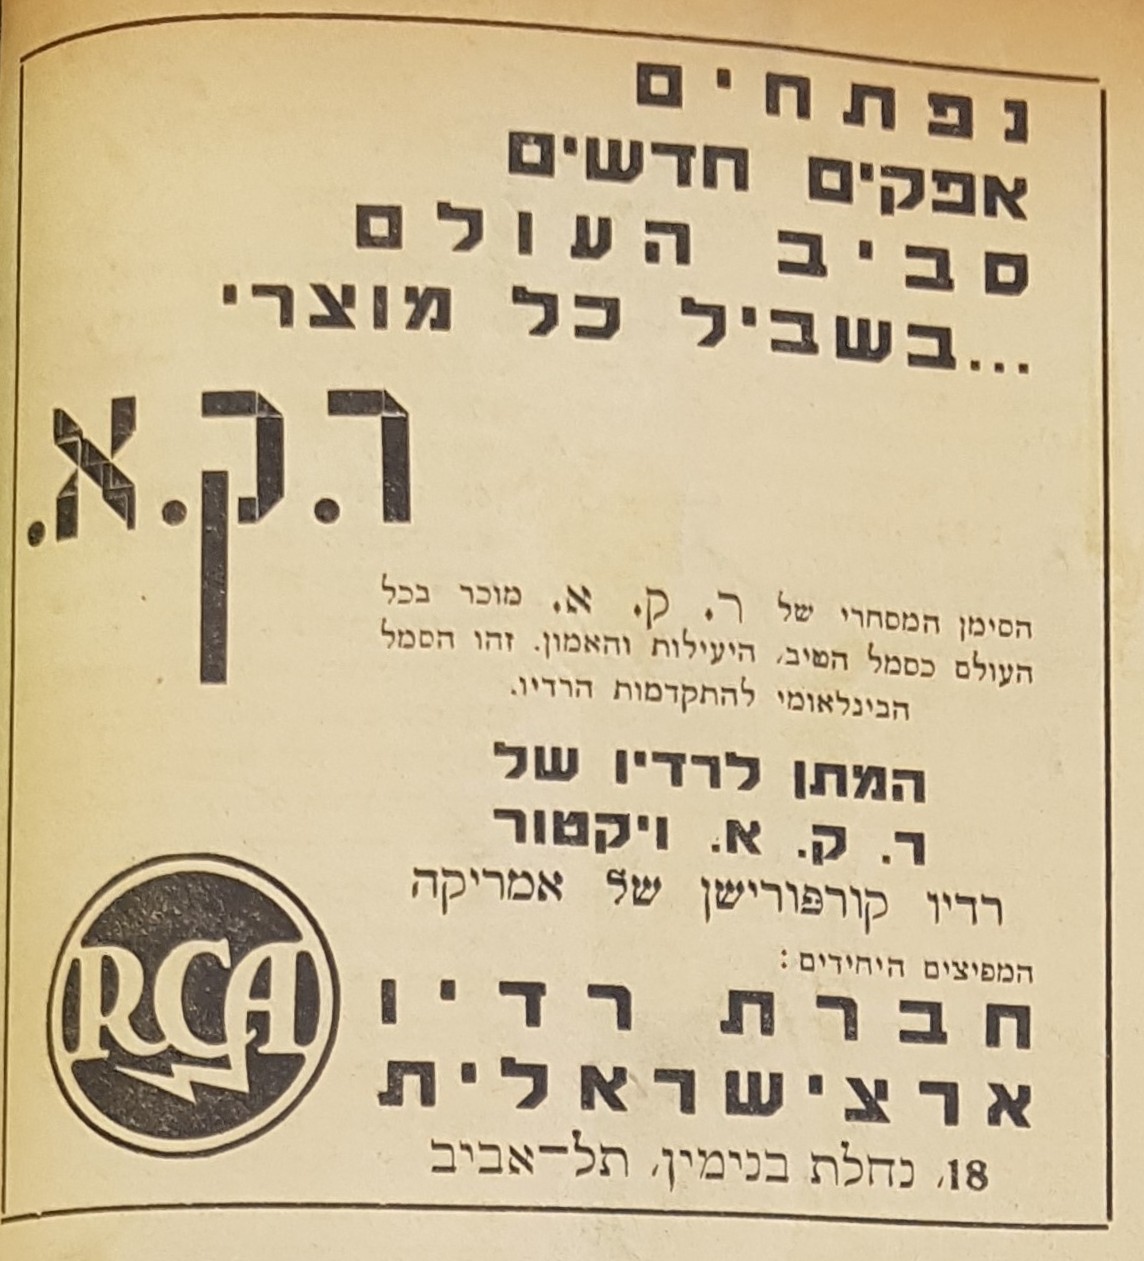 advert for RCA that appeared in Hagalgal vol4. No23 page 24